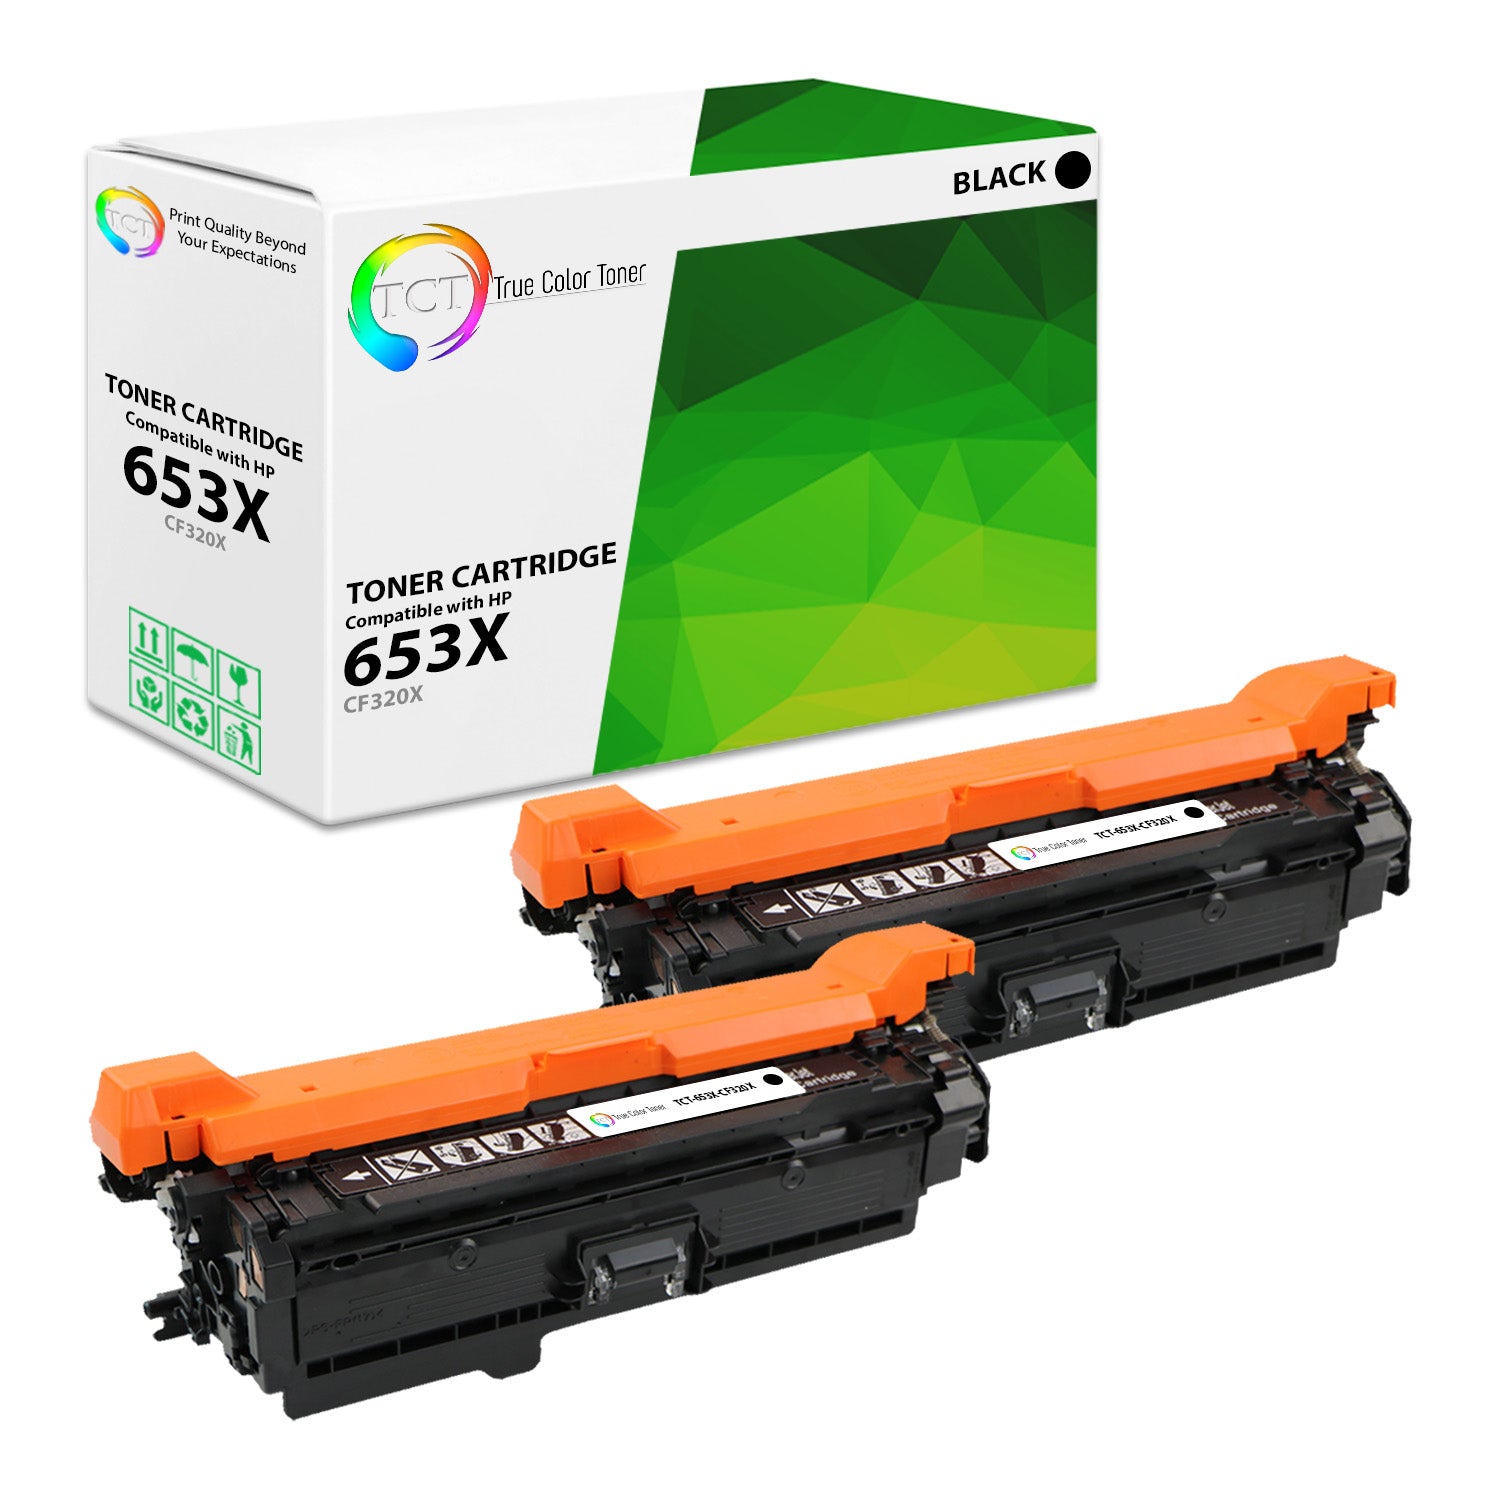 TCT Compatible High Yield Toner Cartridge Replacement for the HP 653X Series - 2 Pack Black